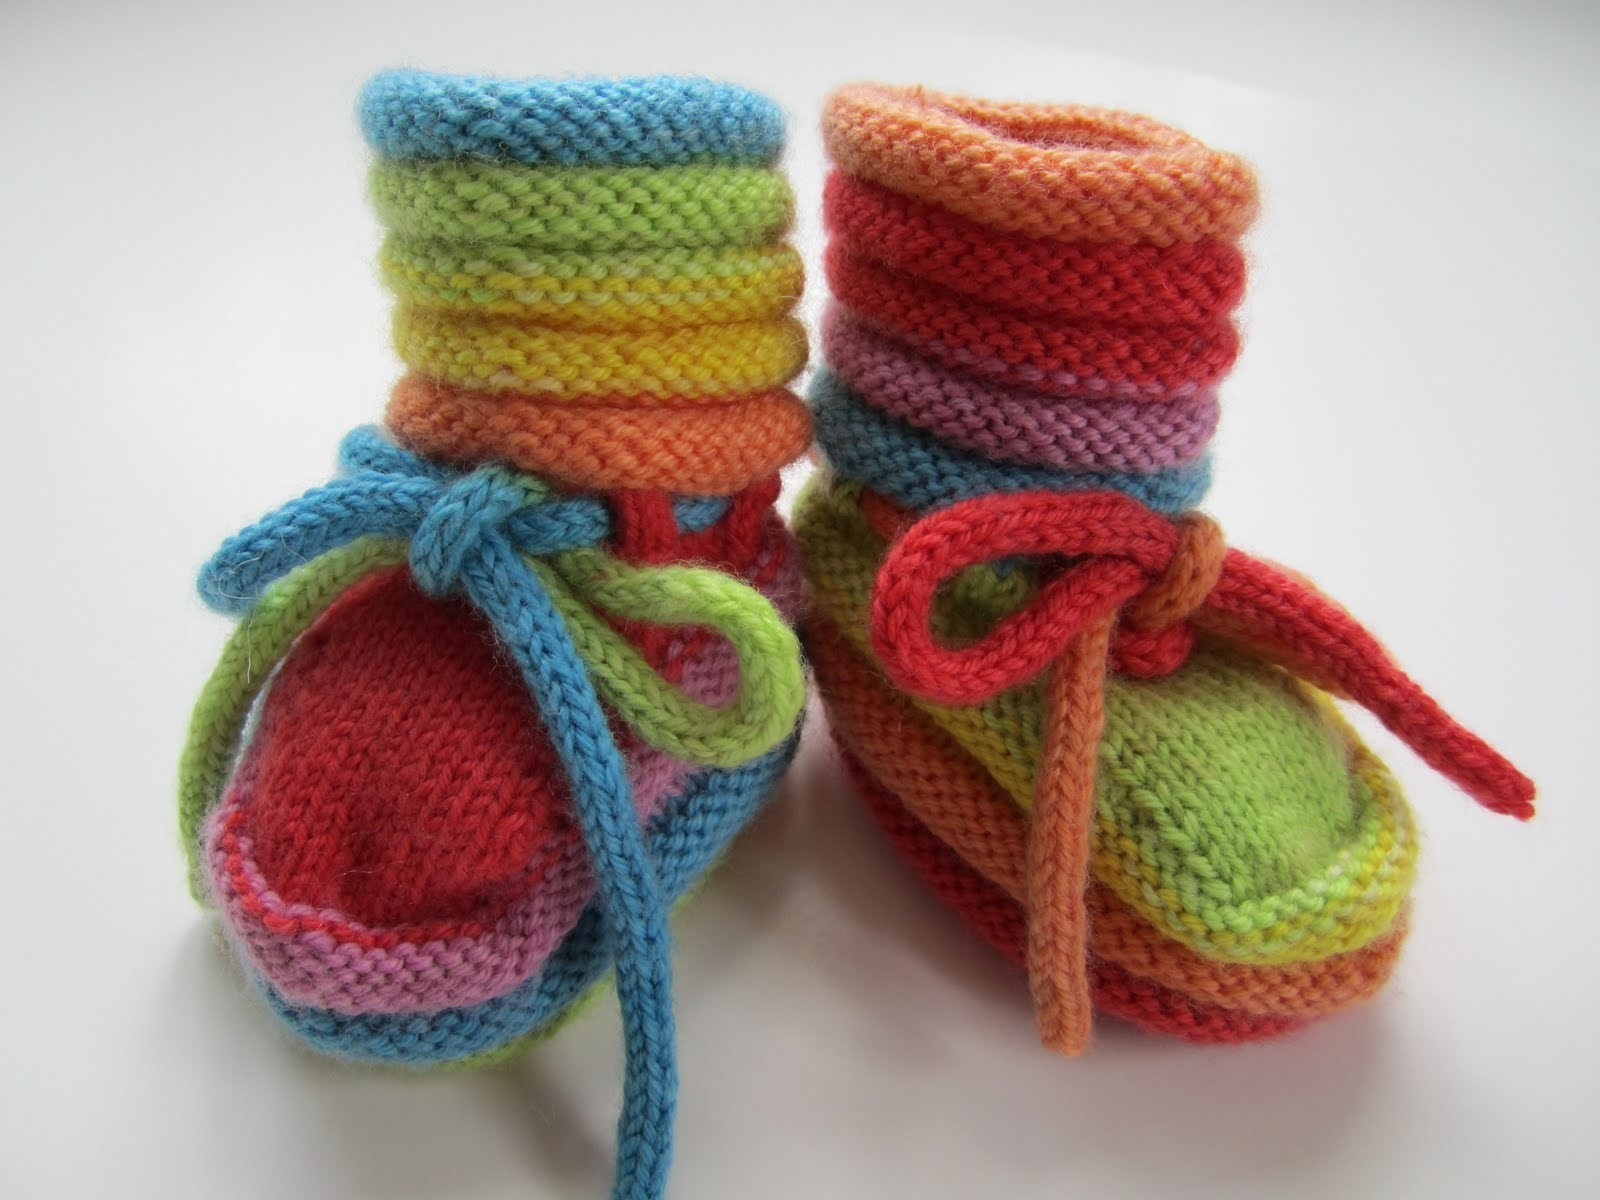 Free Knitting Patterns For Babies Booties Knit Ba Slipper Booties Free Patterns Crochet And Knitting Knitted